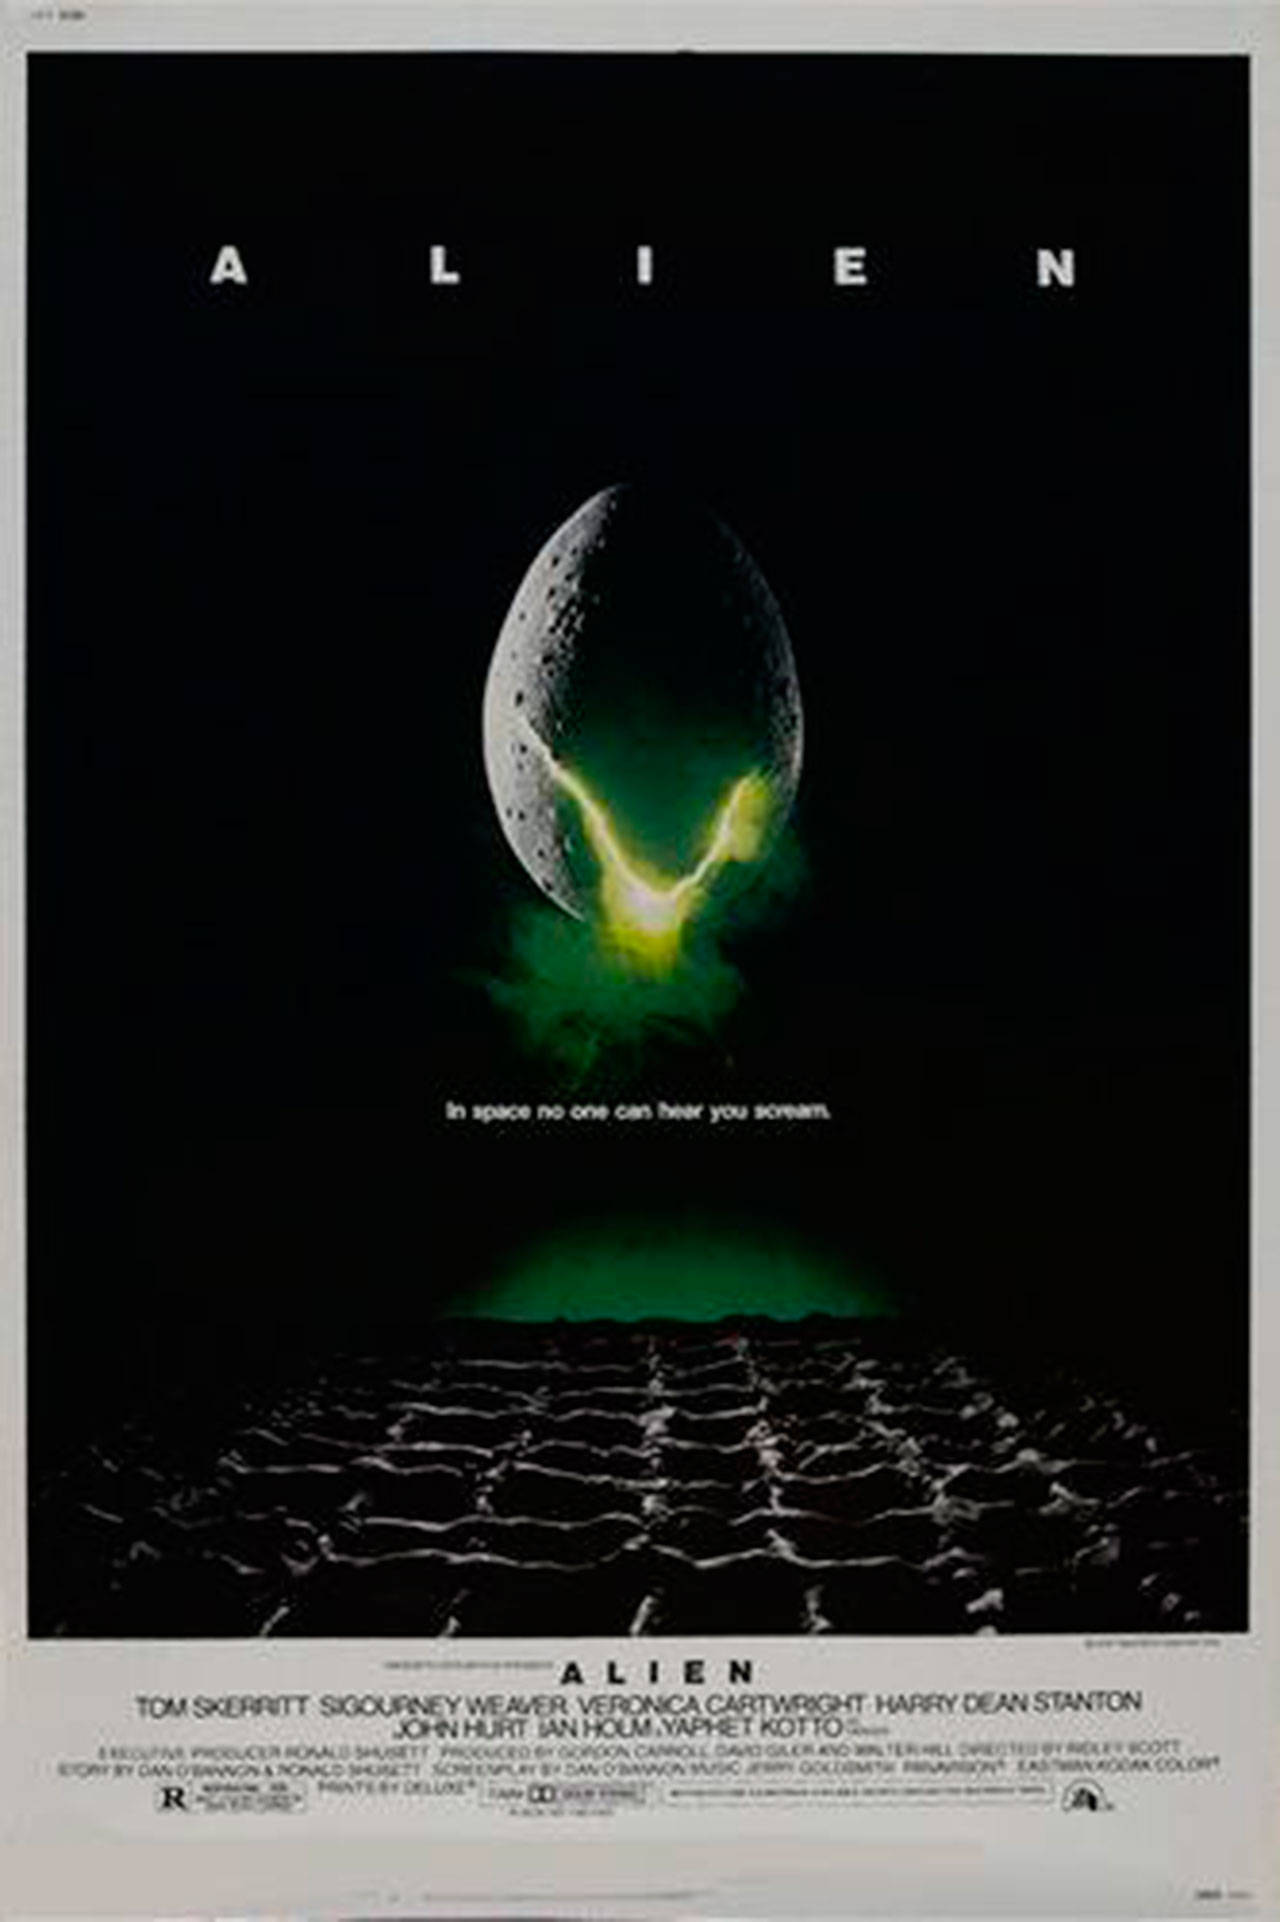 Image courtesy of 20th Century Fox | Ridley Scott’s 1979 masterpiece “Alien,” will return to select theaters across the country, including Bainbridge Cinemas, as part of a special 40th anniversary screening event at 7 p.m. Wednesday, Oct. 16.